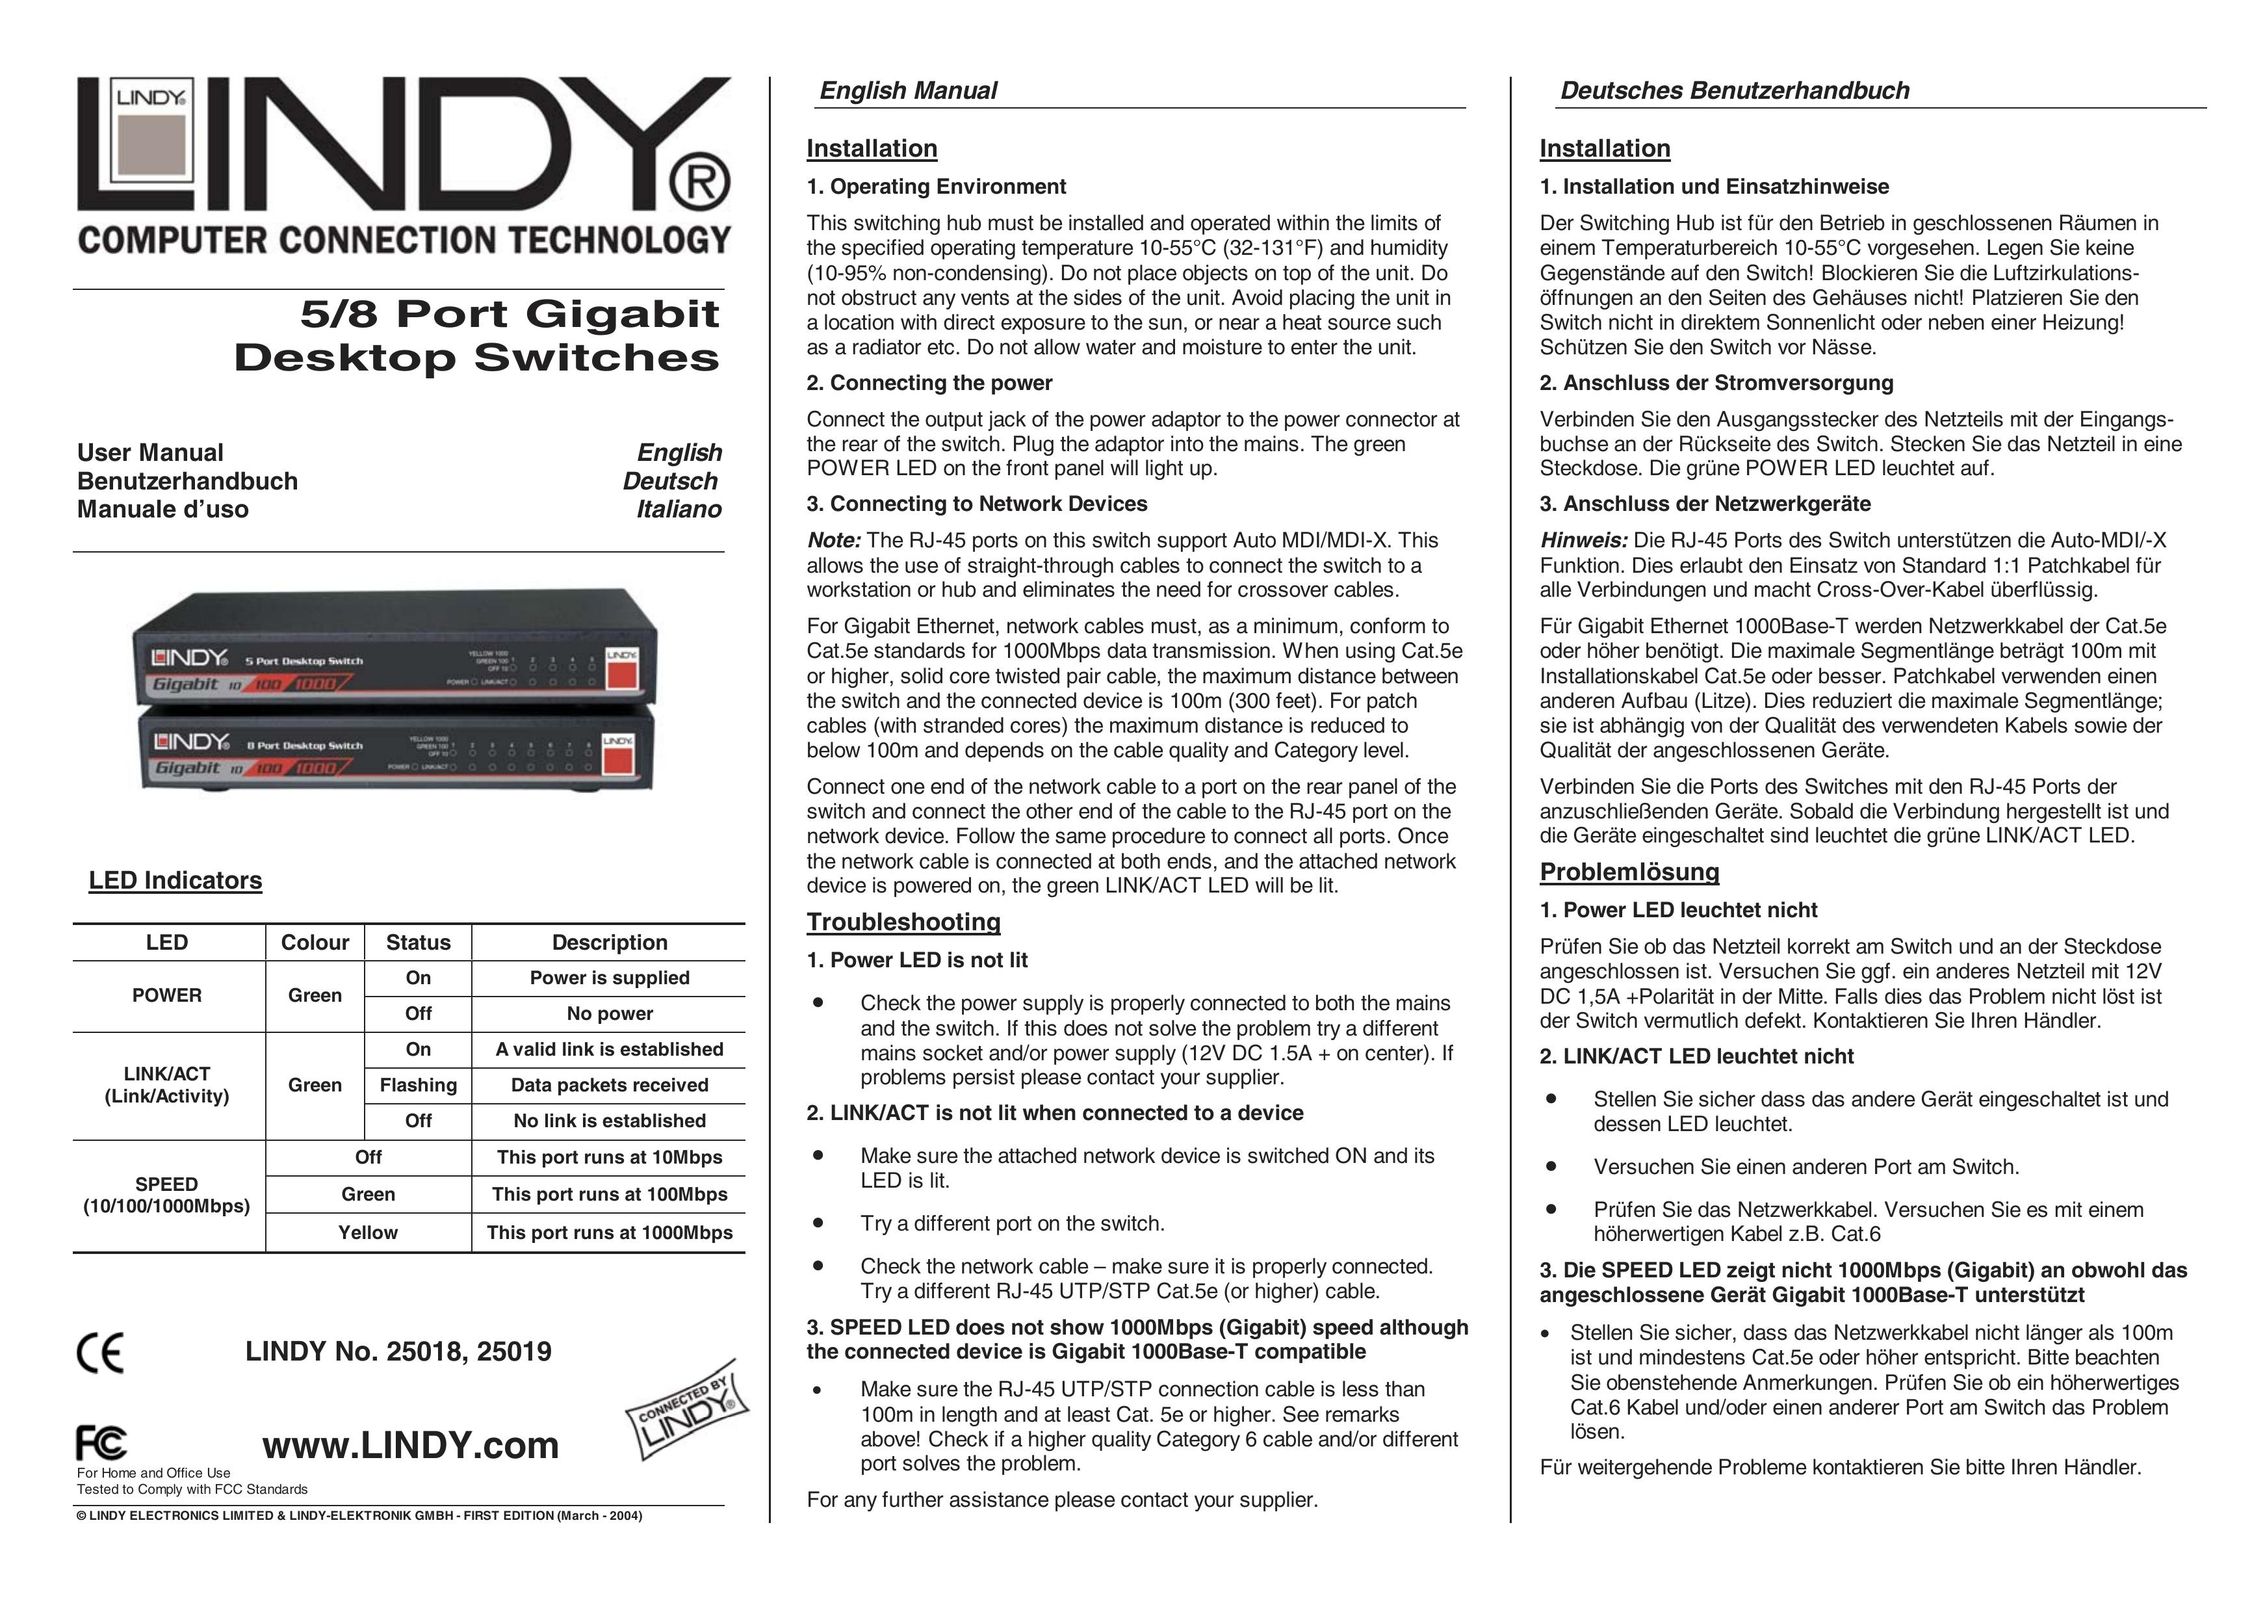 Lindy 25019 Personal Computer User Manual